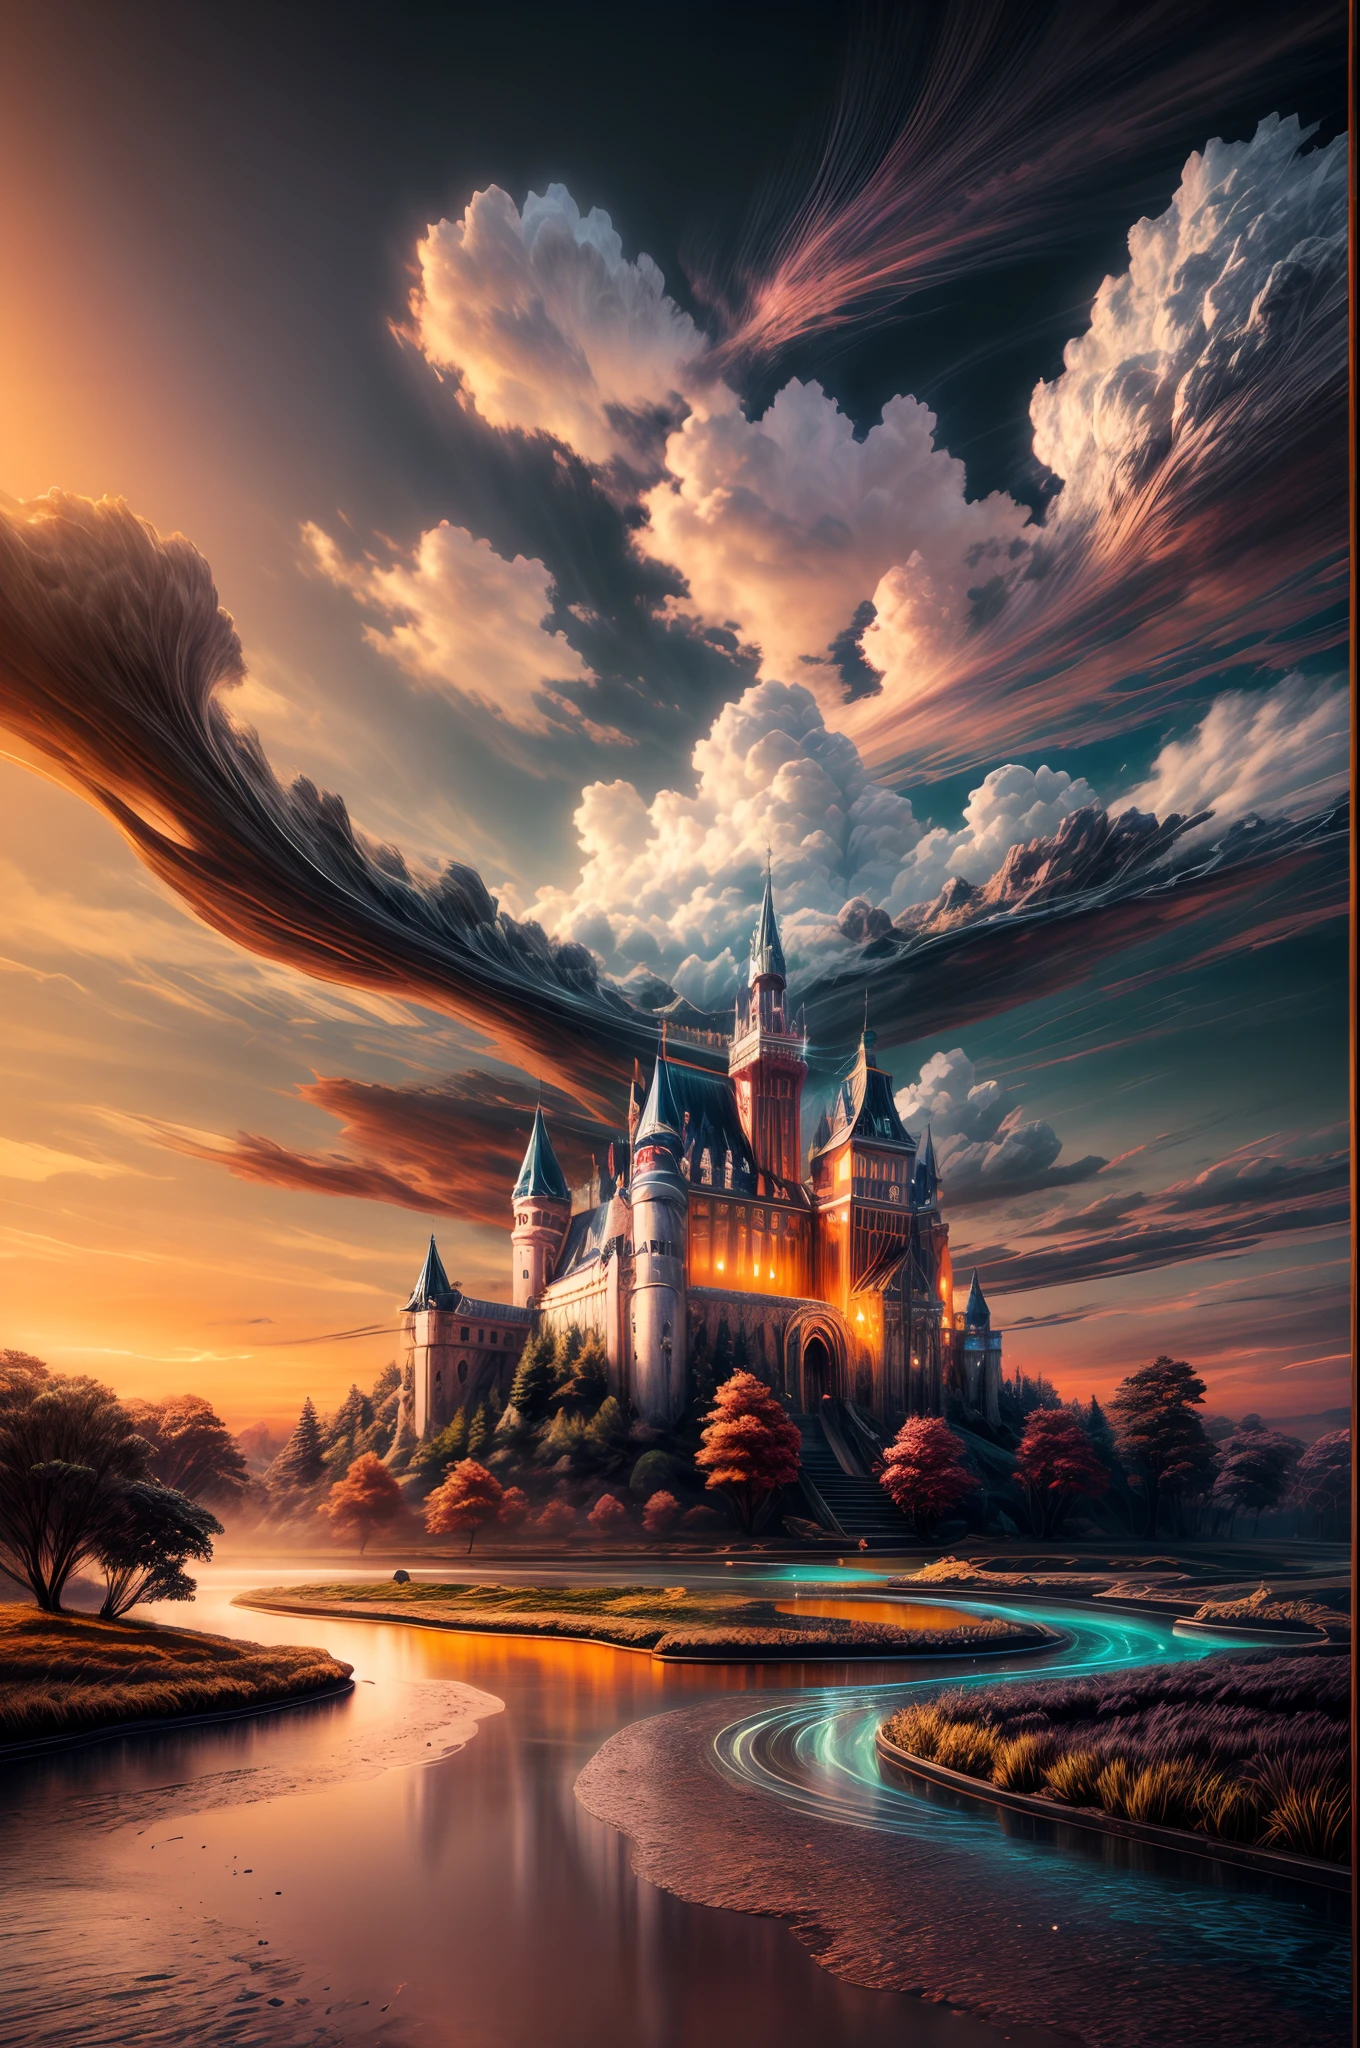 Generate a realistic fantasy landscape with beautiful, ornate romantic buildings, floating islands, crystalline waterfalls streaming from the floating islands, and a dreamy landscape of highly detailed flowers and dreamy watercolors. This is the (((romantic))) realm of the gods. (((The castles look like they are carved from shimmering marble, with distinct and complex details adding to their realism.))) Cotton candy clouds wisp into beautiful glittering stars across the colorful sky, with mesmerizing pink and purple celestial lights creating an enchanting atmosphere. Include many different levels and high visual interest. The environment is large and awe-inspiring, and this is a macro shot. The general ambience is peace, tranquility, and highly detailed sweetness. Include interesting fantasy elements with colors that complement the rest of the landscape. The sky should be very detailed. The landscape should very detailed. All buildings should be ornate with complex and intricate details. Include a luminous and magical atmosphere, magic bubbles, shimmering colors, many small fantasy details including iridescence, expertly created majestic landscapes, and shimmer and glimmer. Include lots of vibrant colors and vaguely surreal details. Camera: Utilize dynamic composition to create interest and excitement. CGI, unreal engine, unity engine, (((masterpiece))), high resolution, 8k, best quality, high quality, highres, 16, RAW, ultra highres, ultra details, finely detail, an extremely delicate and beautiful, extremely detailed, real shadow, anime, highly detailed painted, award-winning glamour painting, wonderful painting, art style, stylized